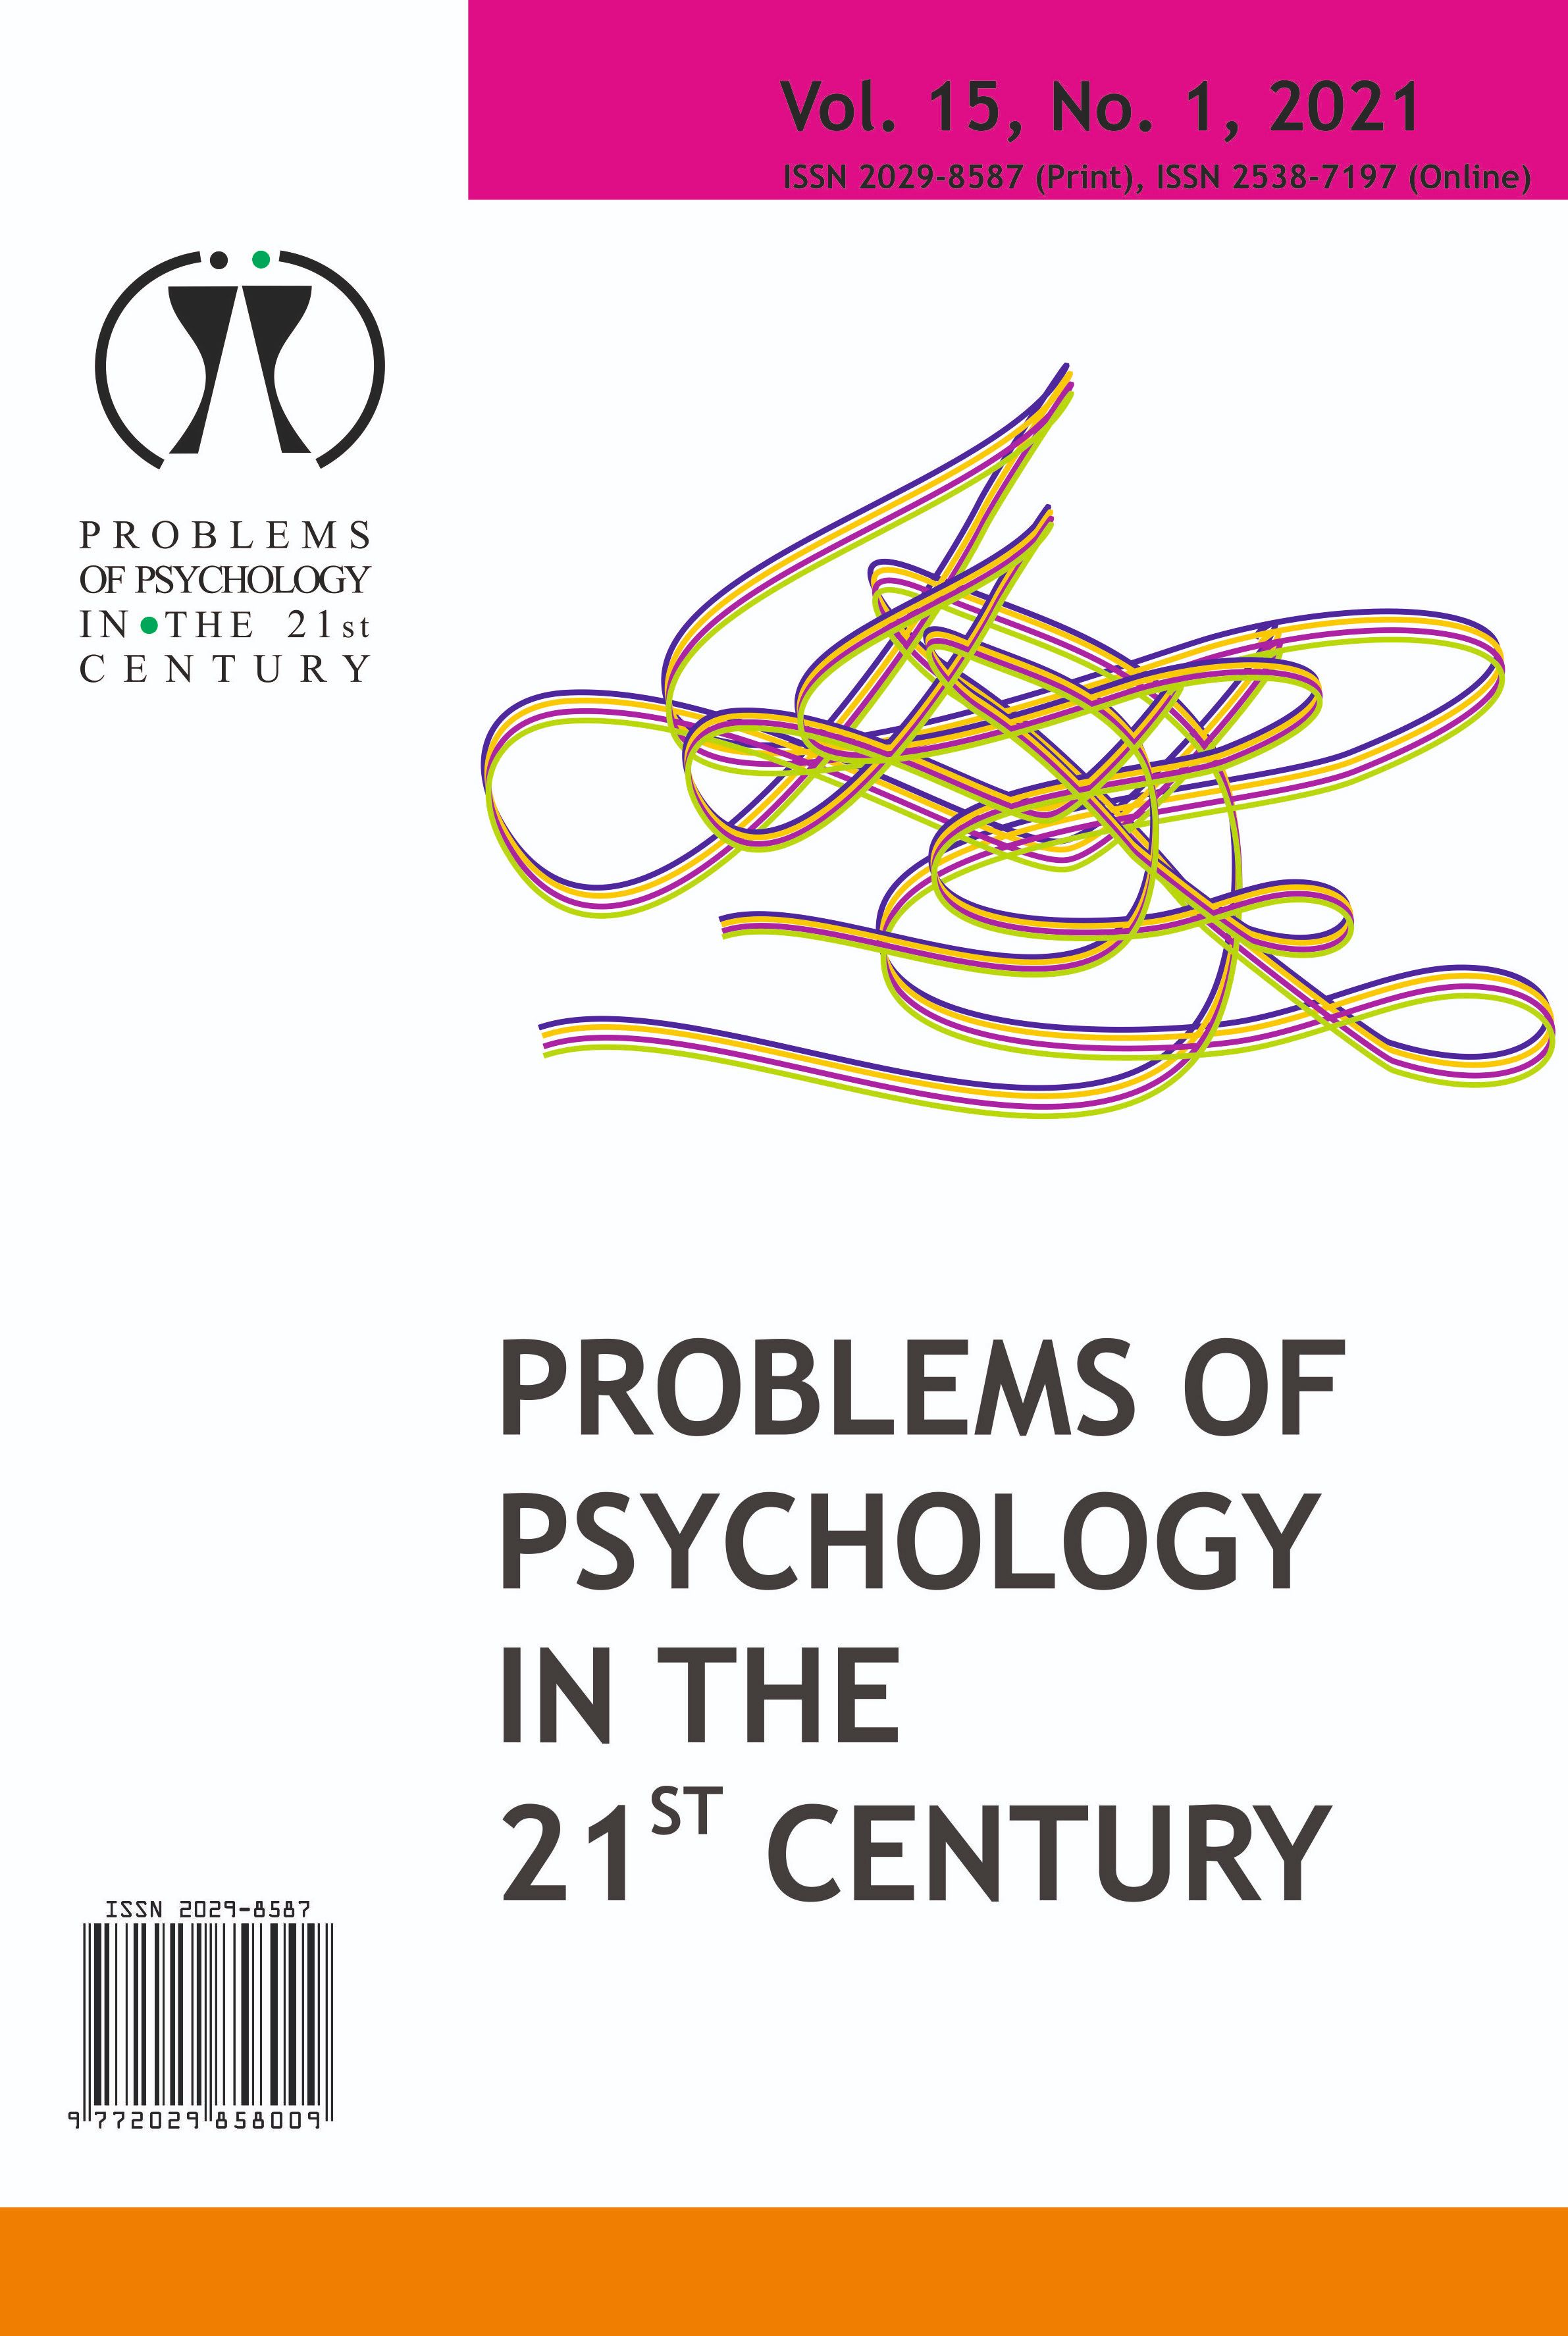 PSYCHOBIOGRAPHY: UNDERSTANDING CONCEPTS, STEPS, AND PROCEDURES IN THE STUDY OF LIVES